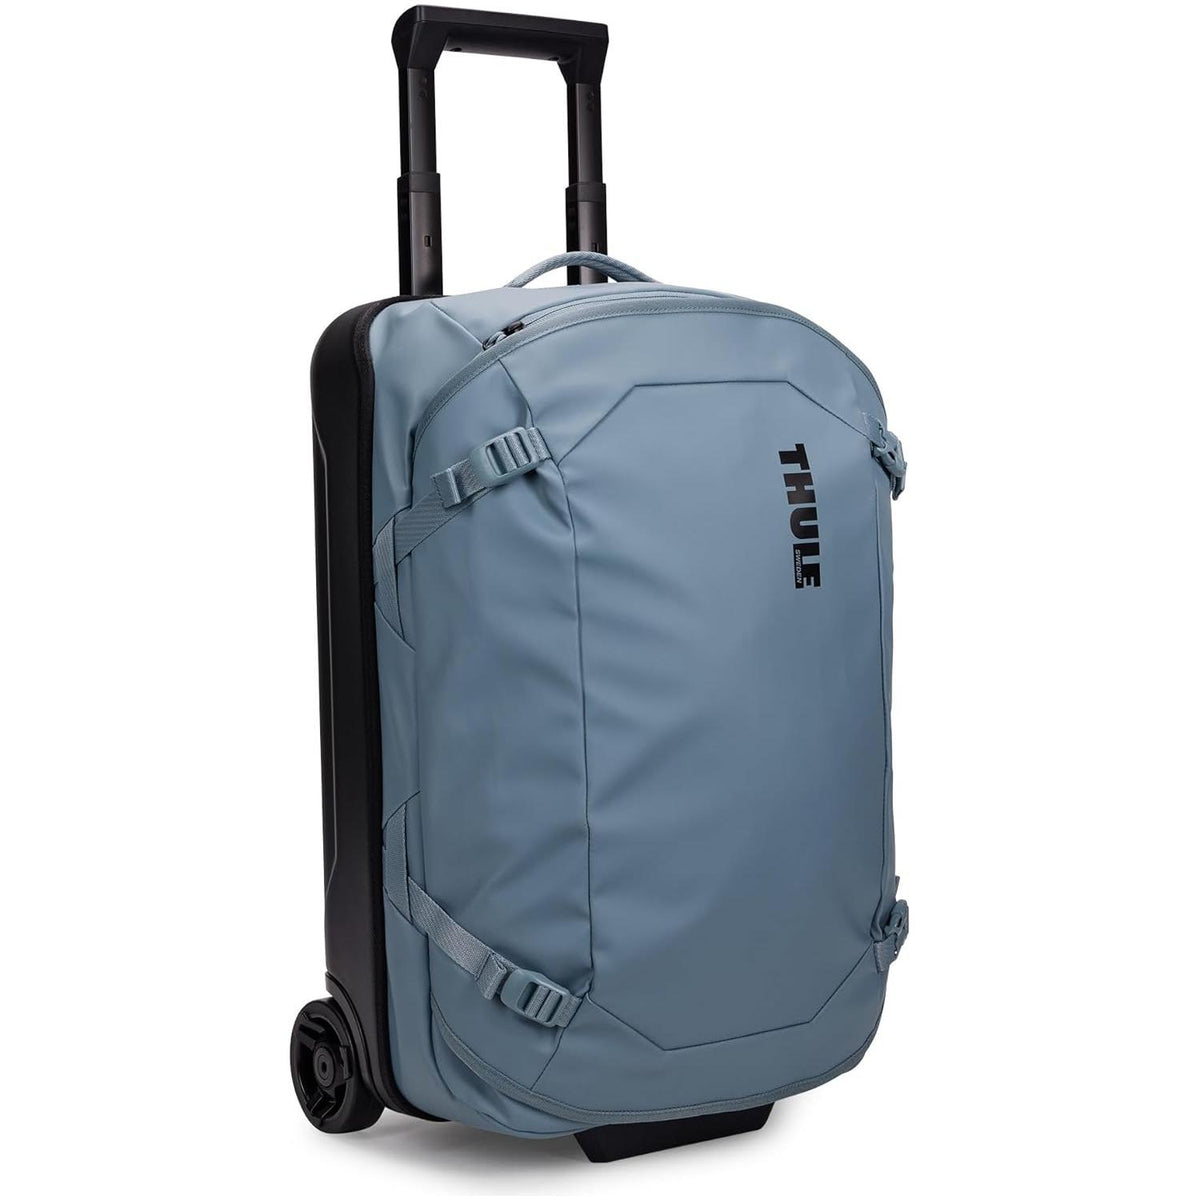 Thule Chasm Carry-On Wheeled Duffel Bag 40L